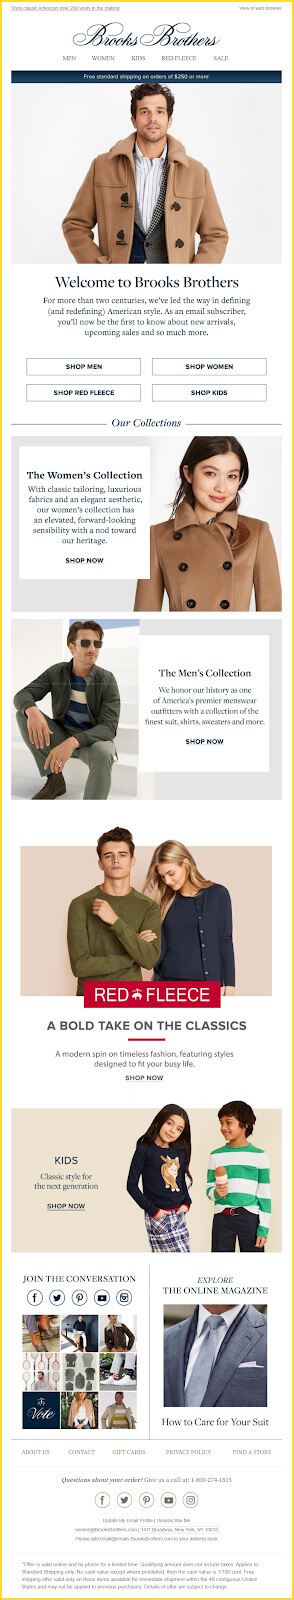 Brooks Brothers email